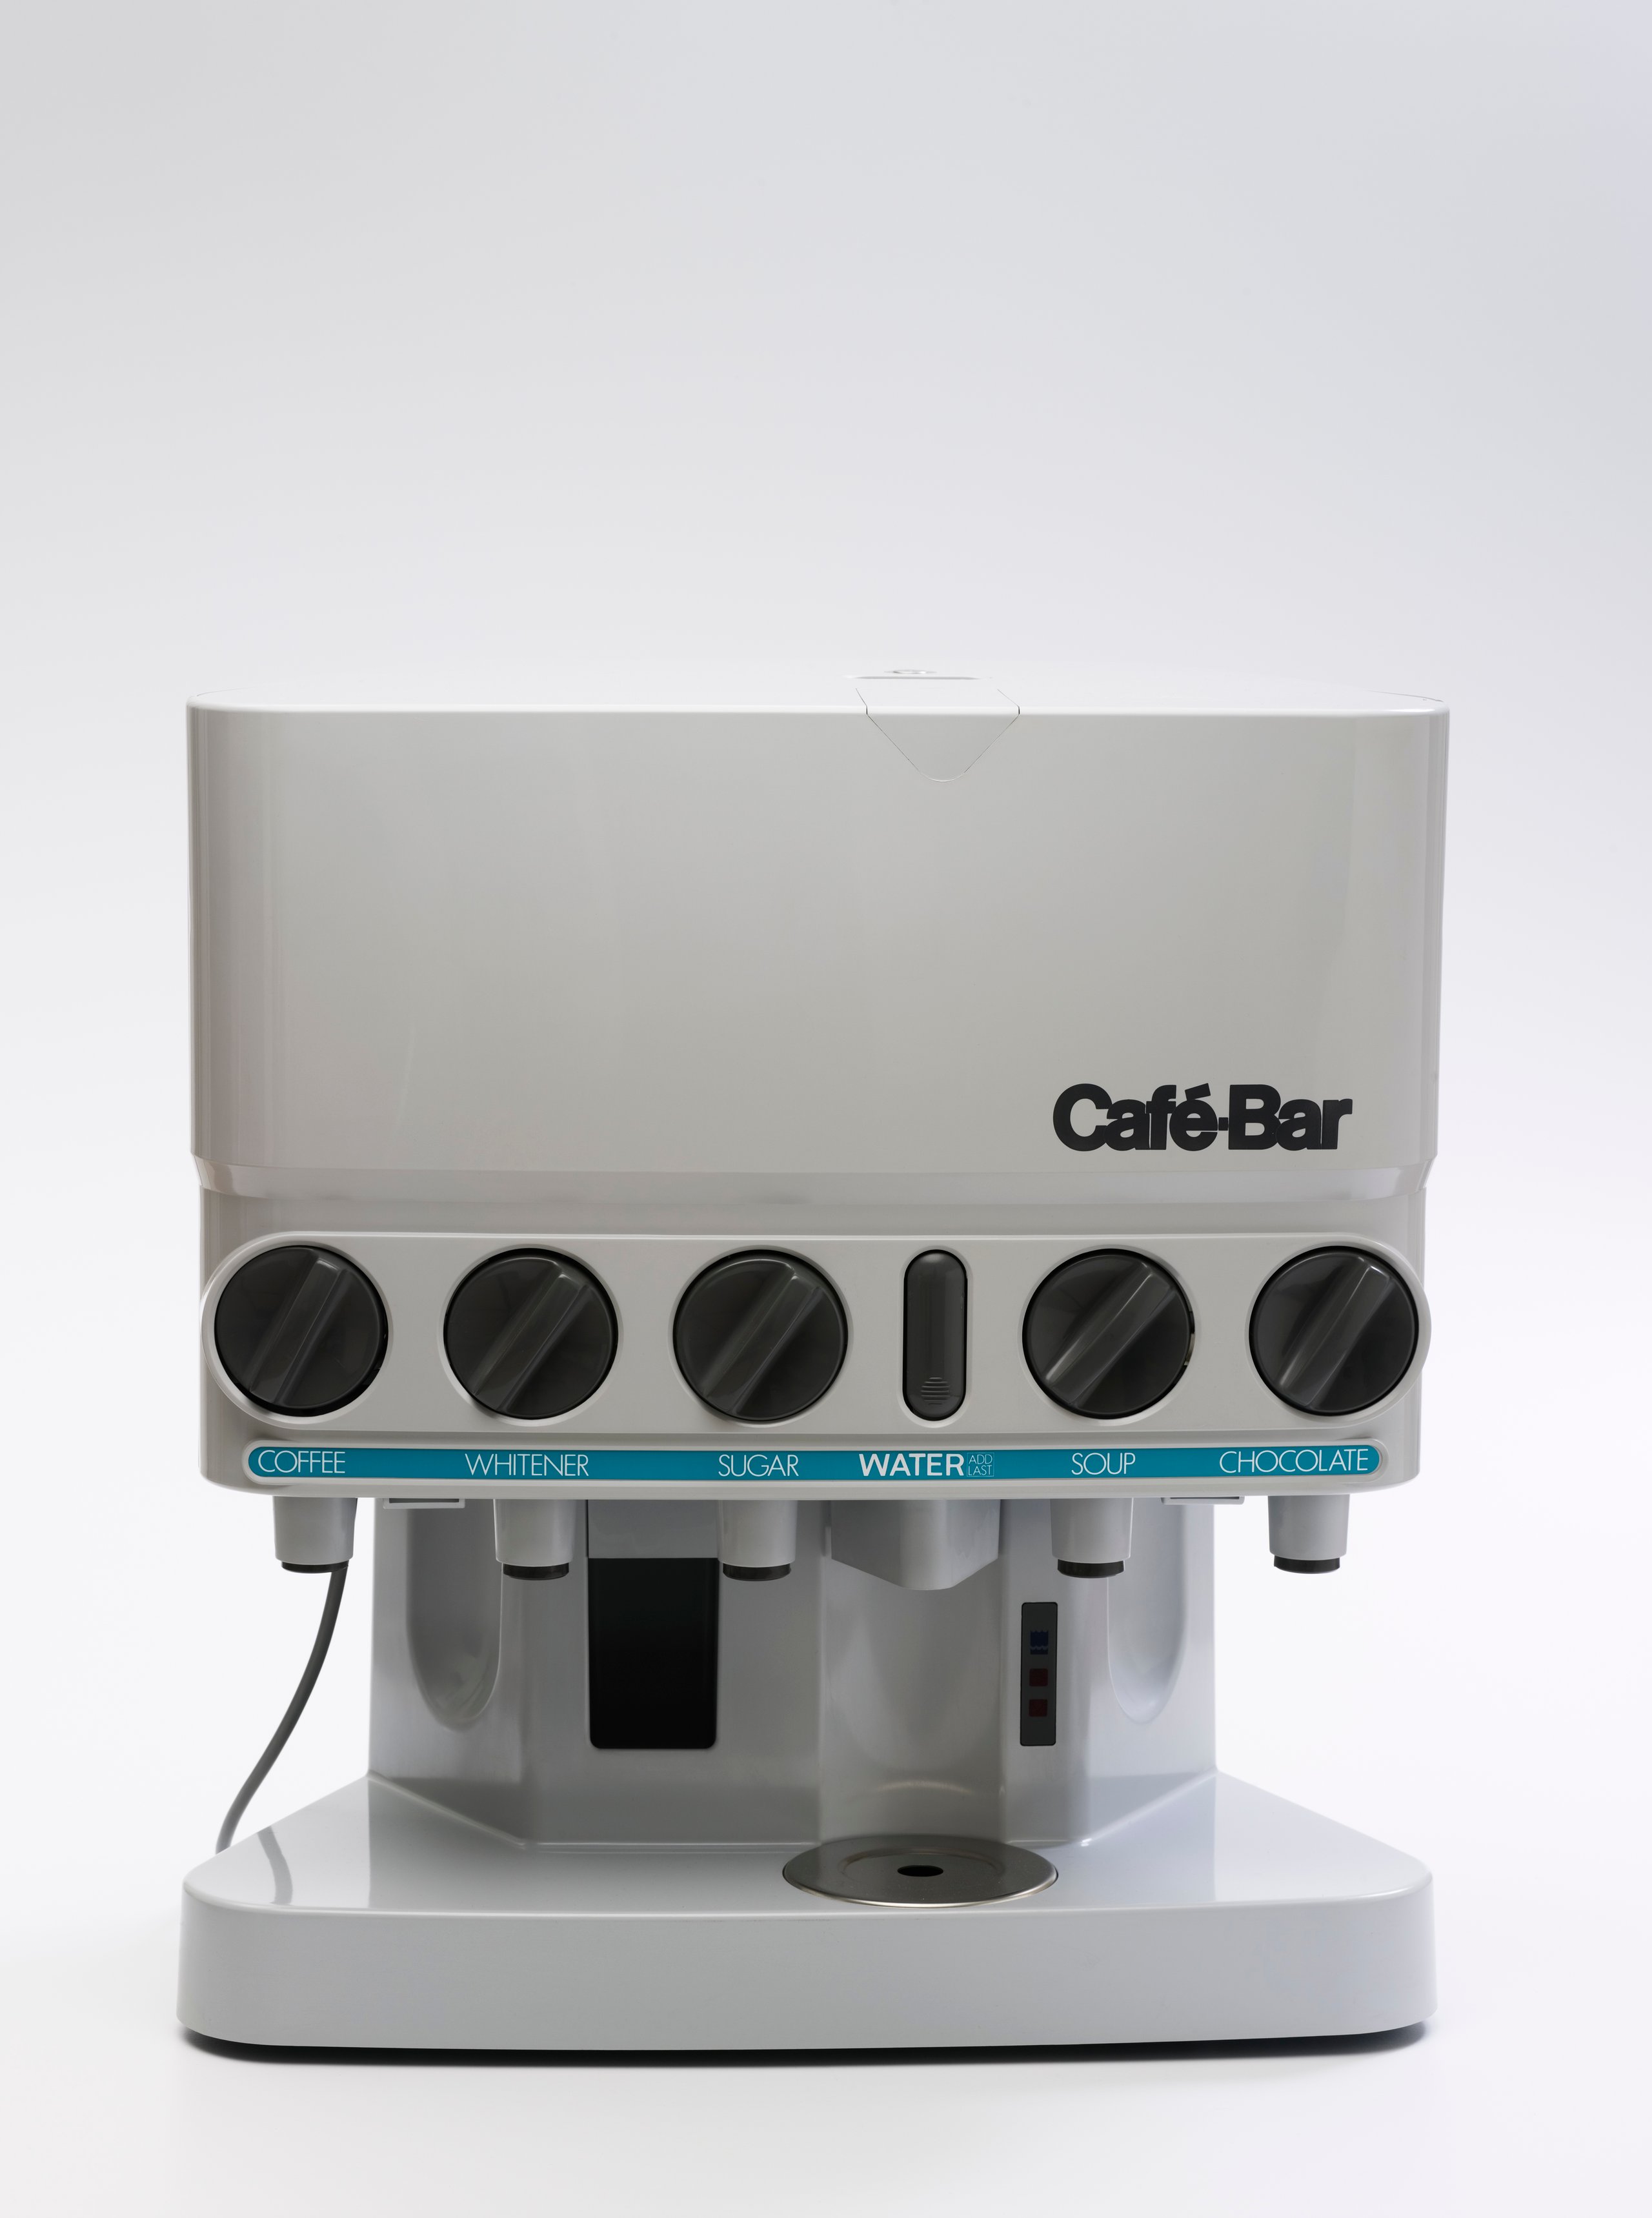 ''Quintet' Cafe-Bar' beverage dispensing machine with components and packaging